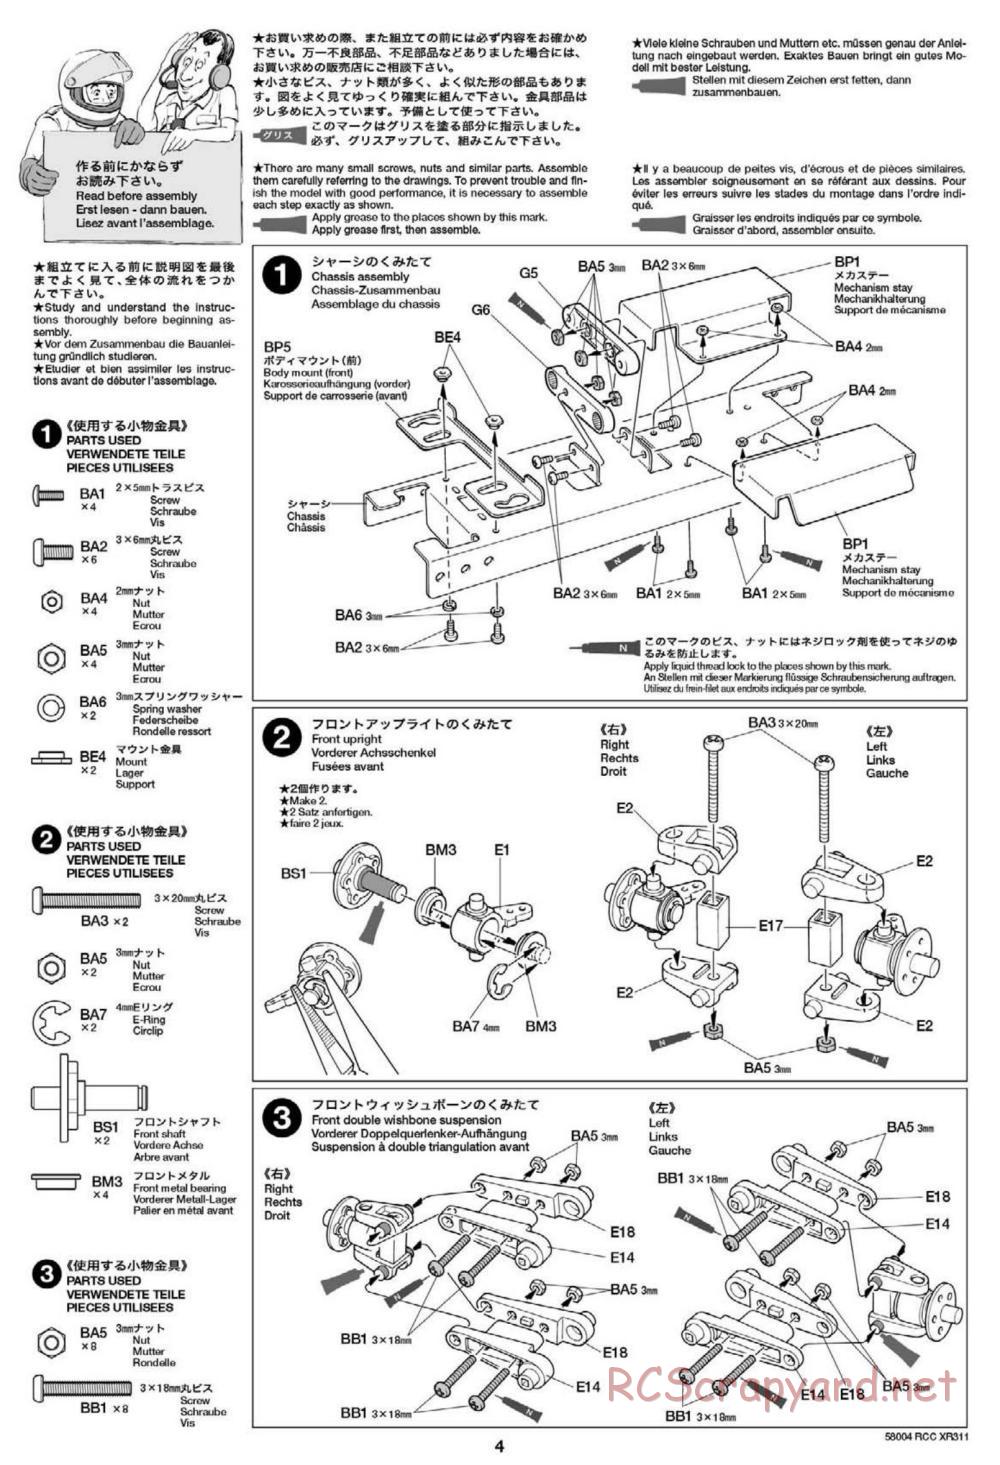 Tamiya - XR311 Combat Support Vehicle (2012) Chassis - Manual - Page 4